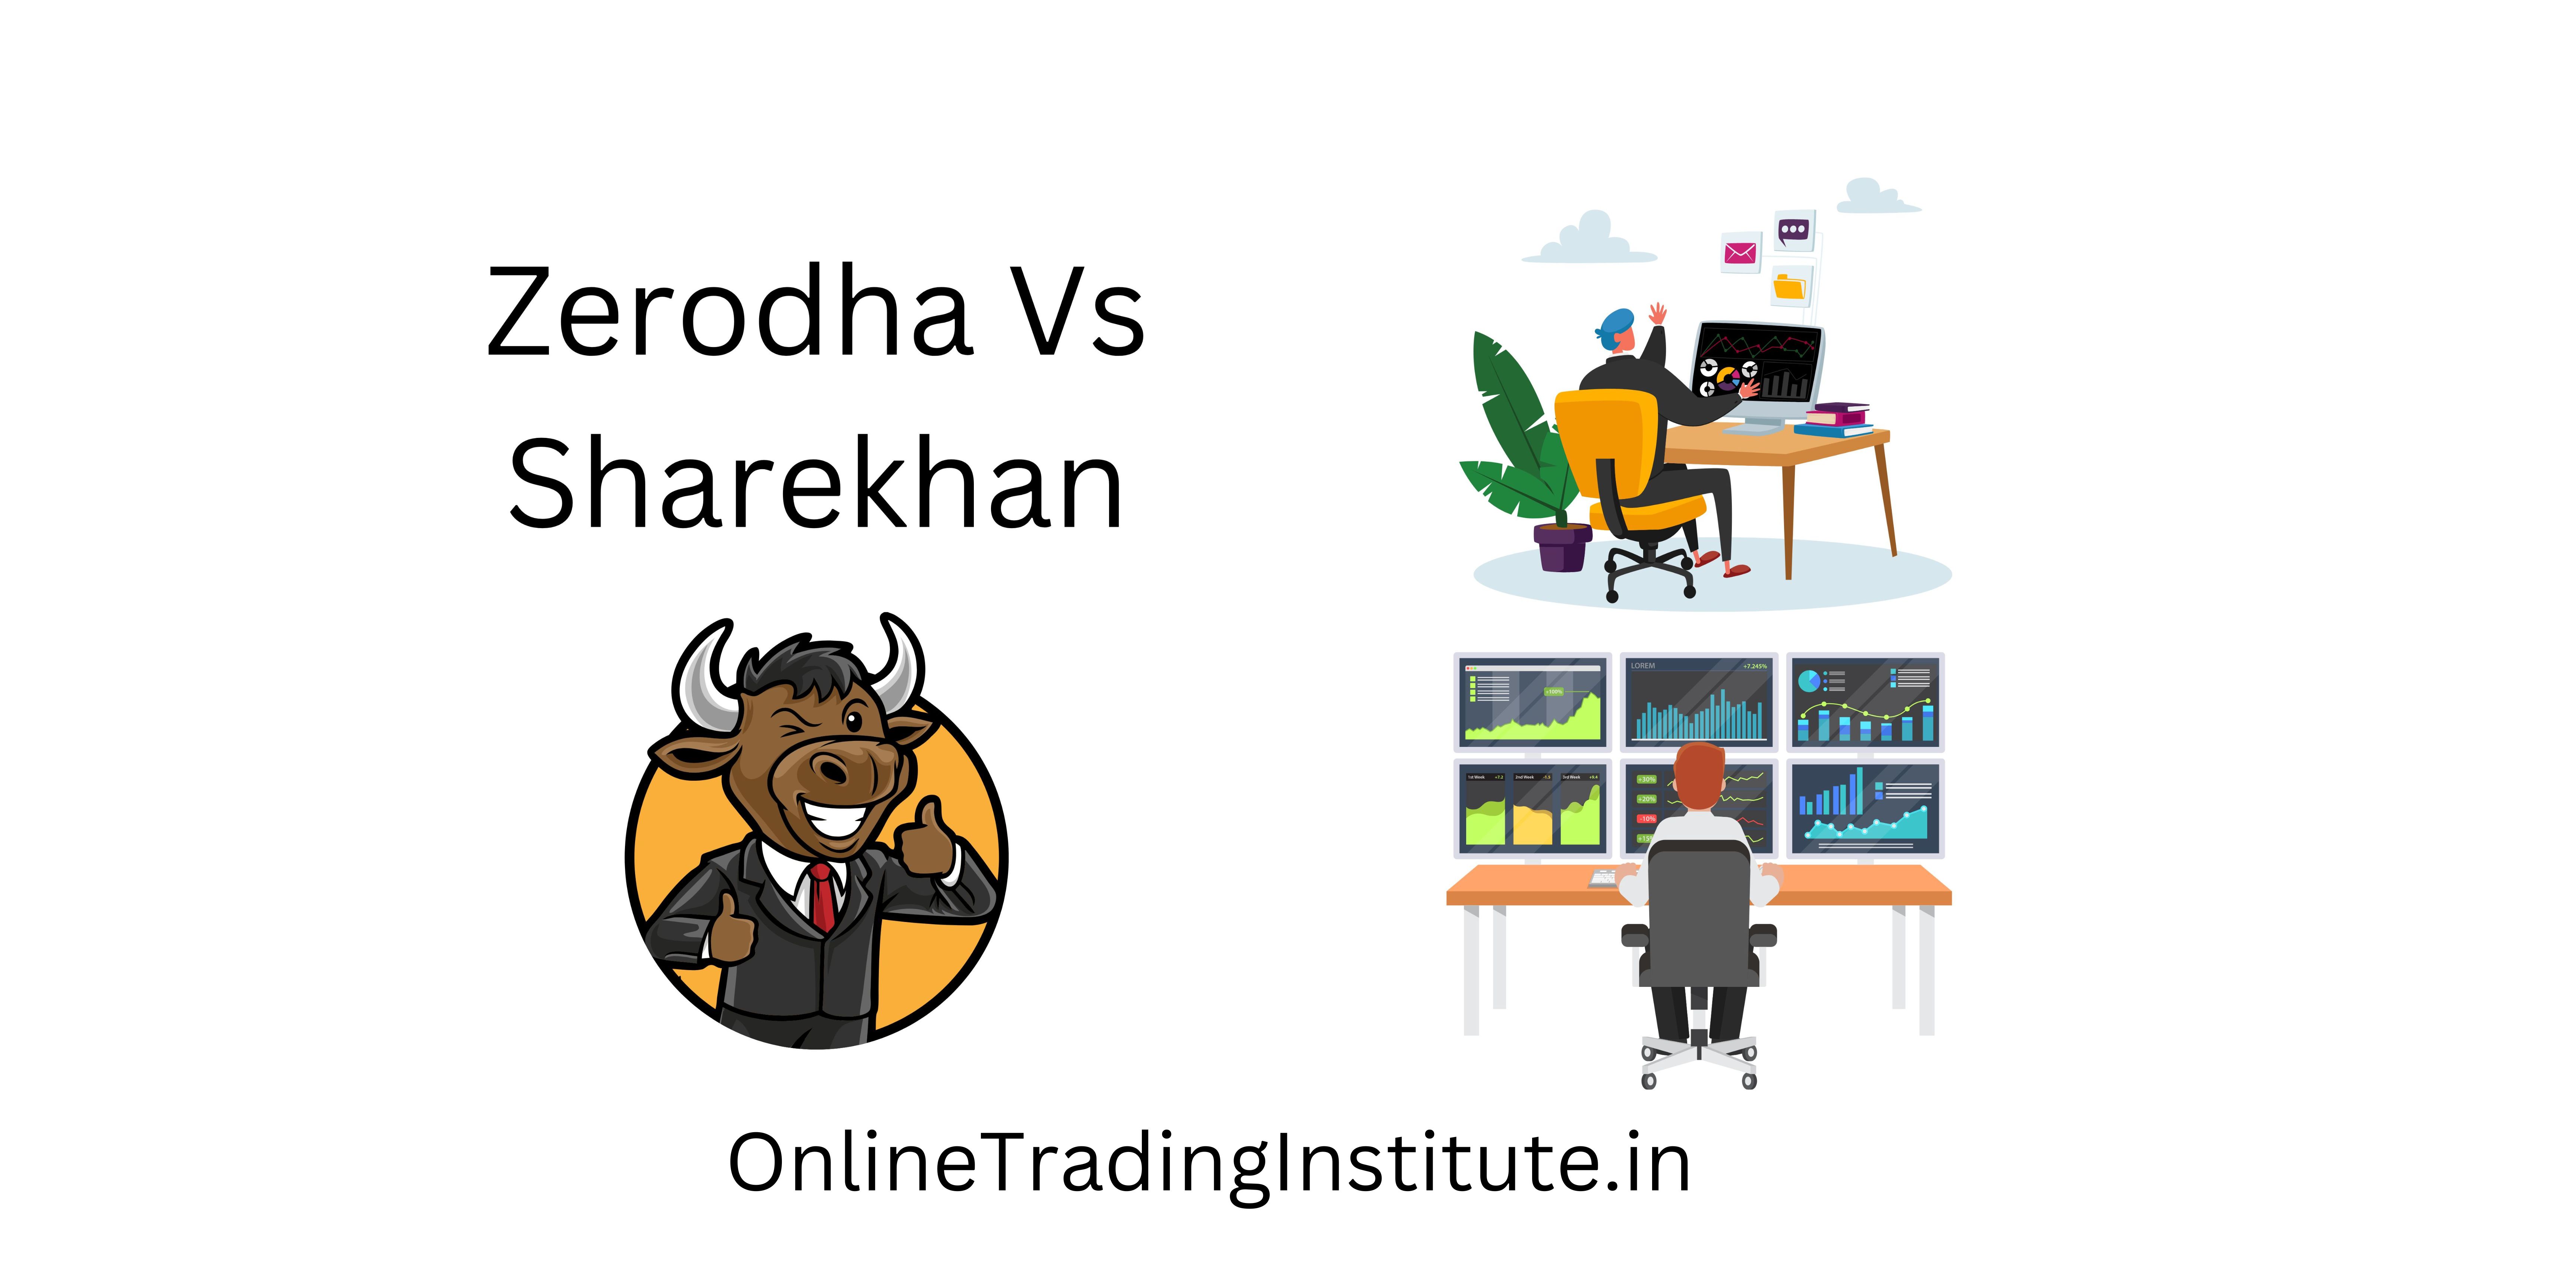 Sharekhan or Zerodha: Which is Better for the Advanced Trader?